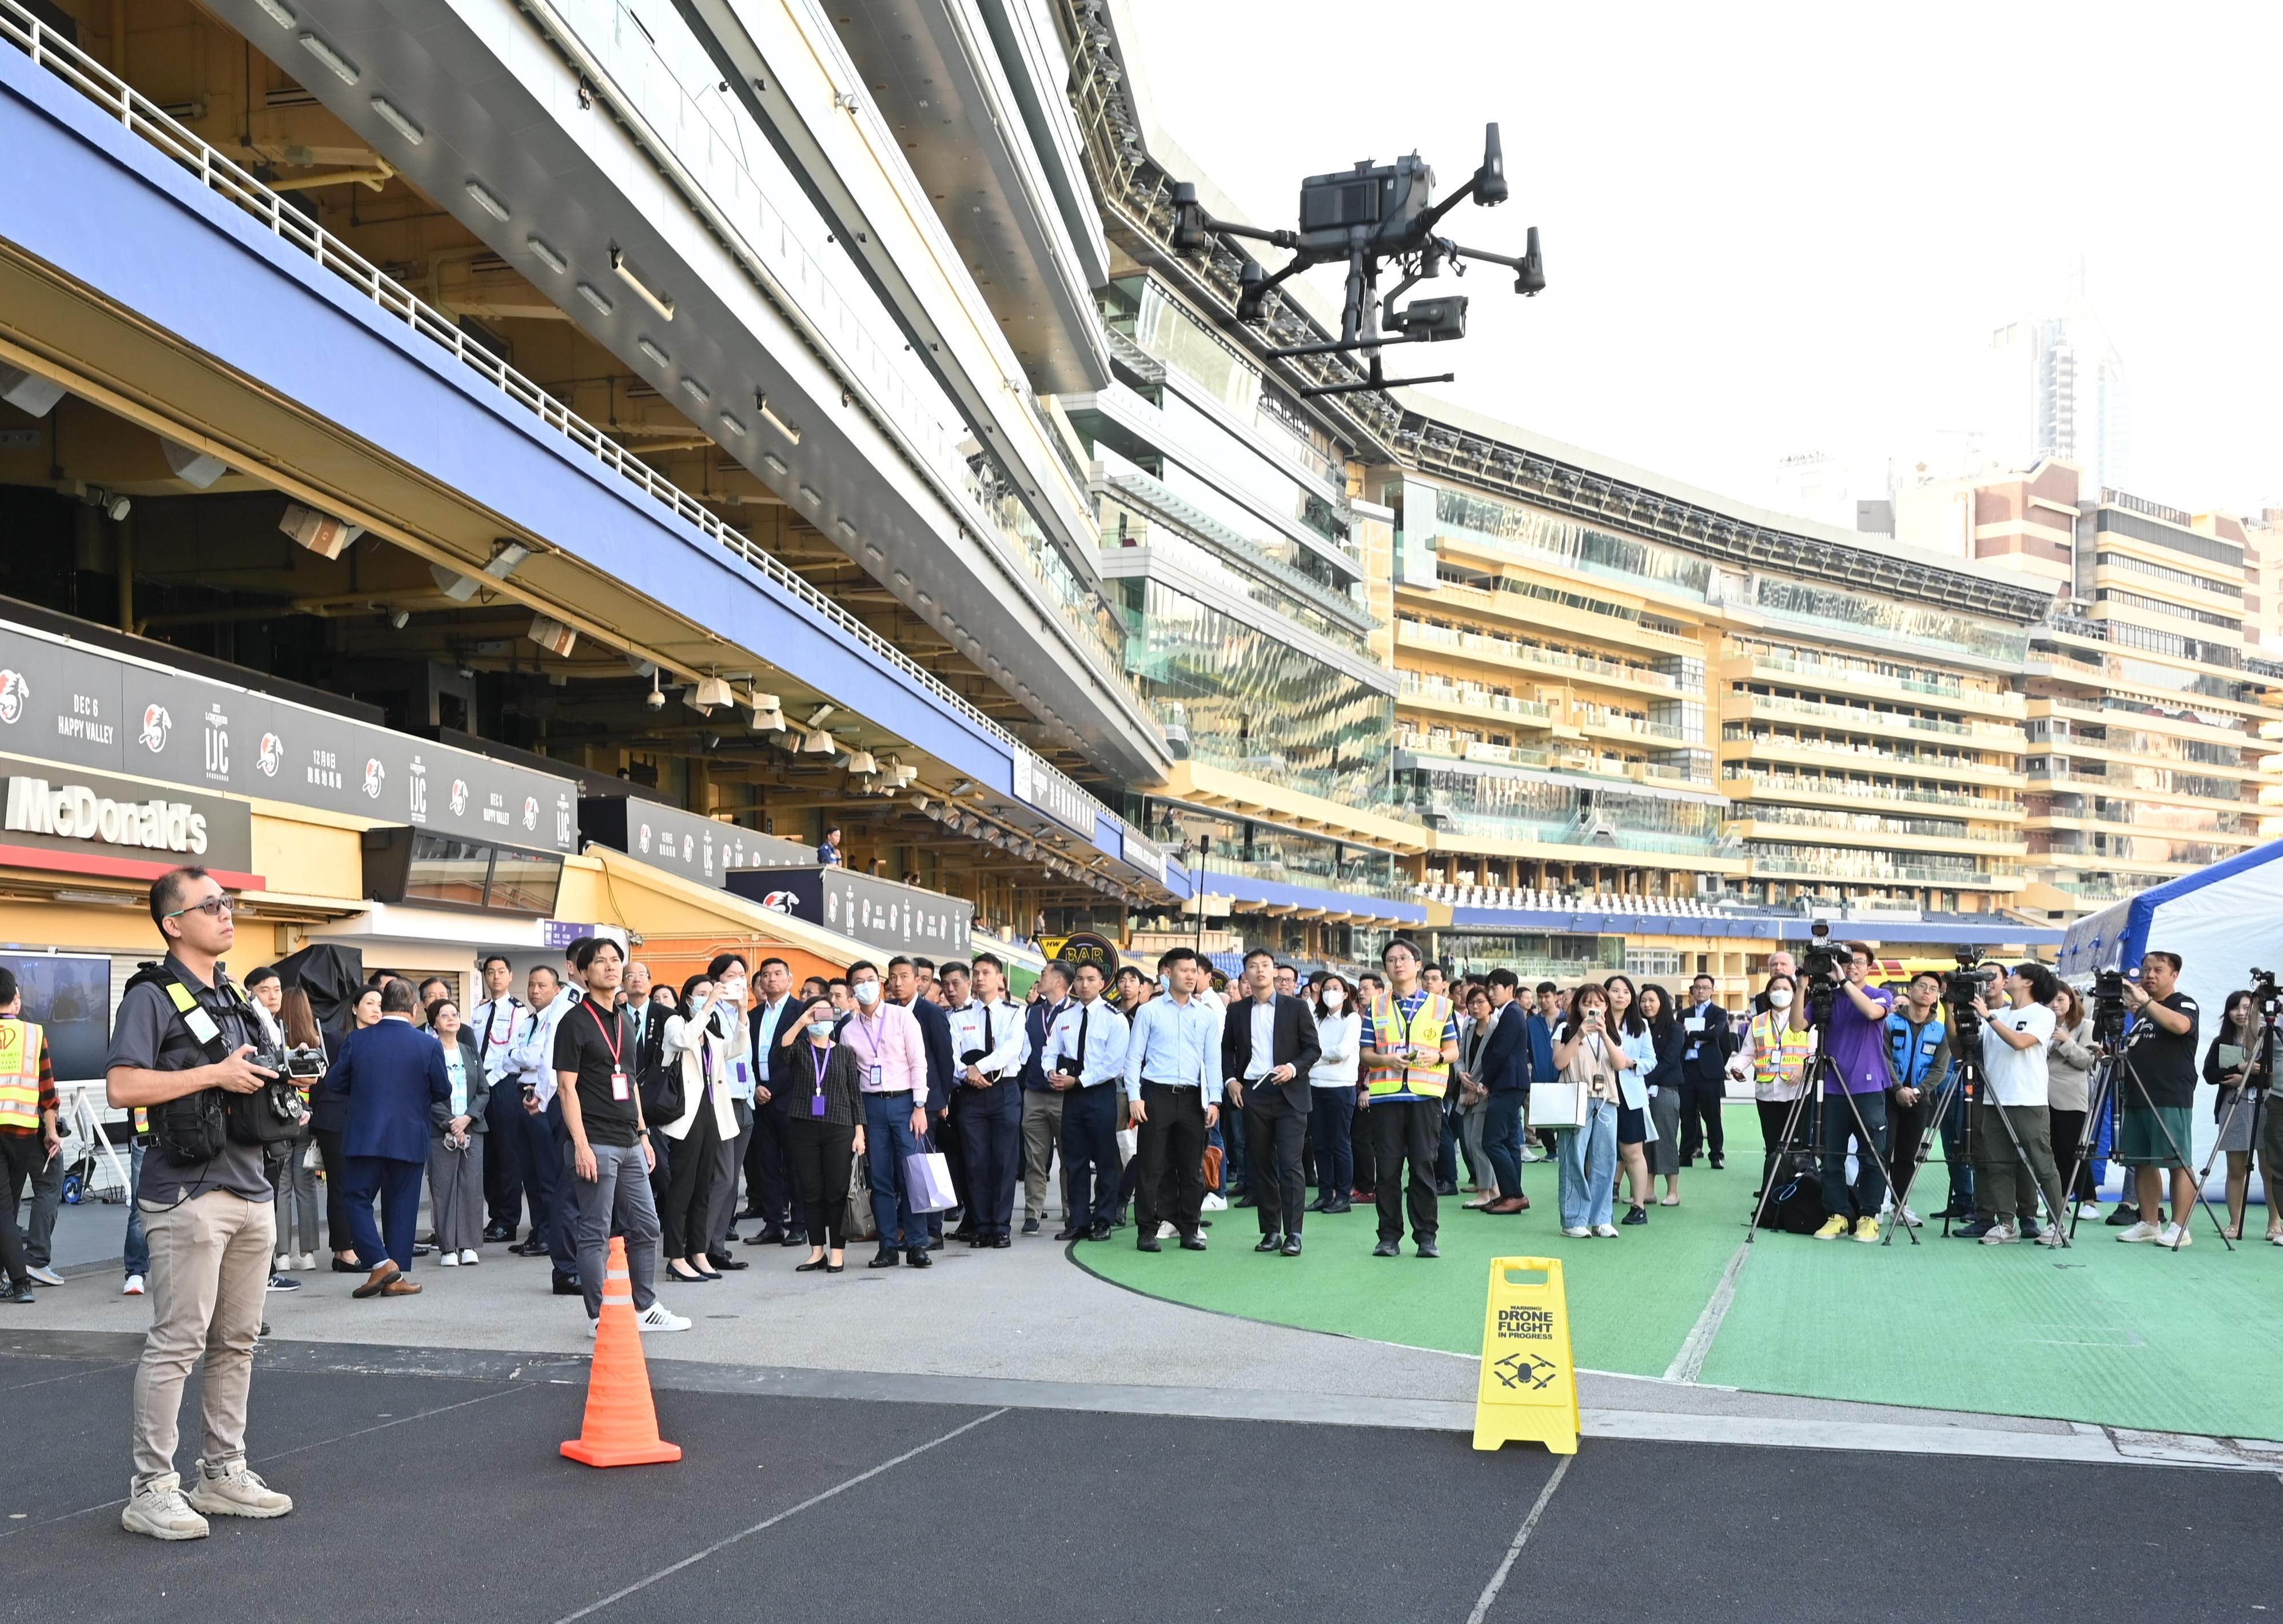 Police Hong Kong Island Regional Headquarters conducted an inter-departmental major incident exercise codenamed "BROKENPIN" with the Fire Services Department, Hospital Authority, Hong Kong Jockey Club, St. John Ambulance Brigade and Hong Kong Association for Conflict and Catastrophe Medicine at Happy Valley Racecourse this afternoon (November 23). Picture shows police officers utilising drones to provide the command post with real-time information.